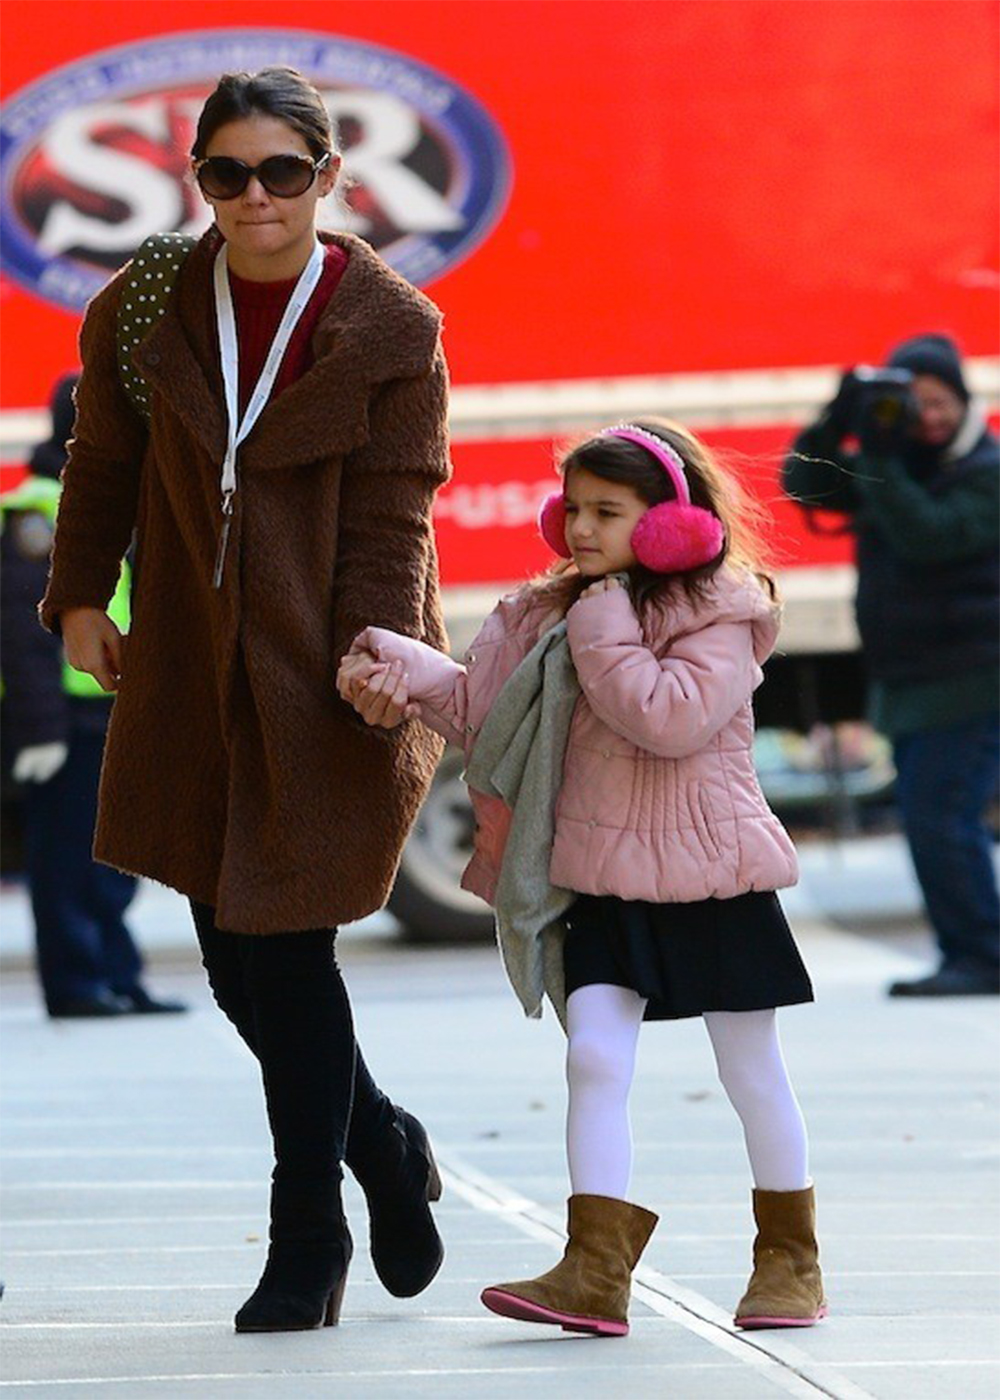 Katie Holmes and Suri Cruise when she was a kid.